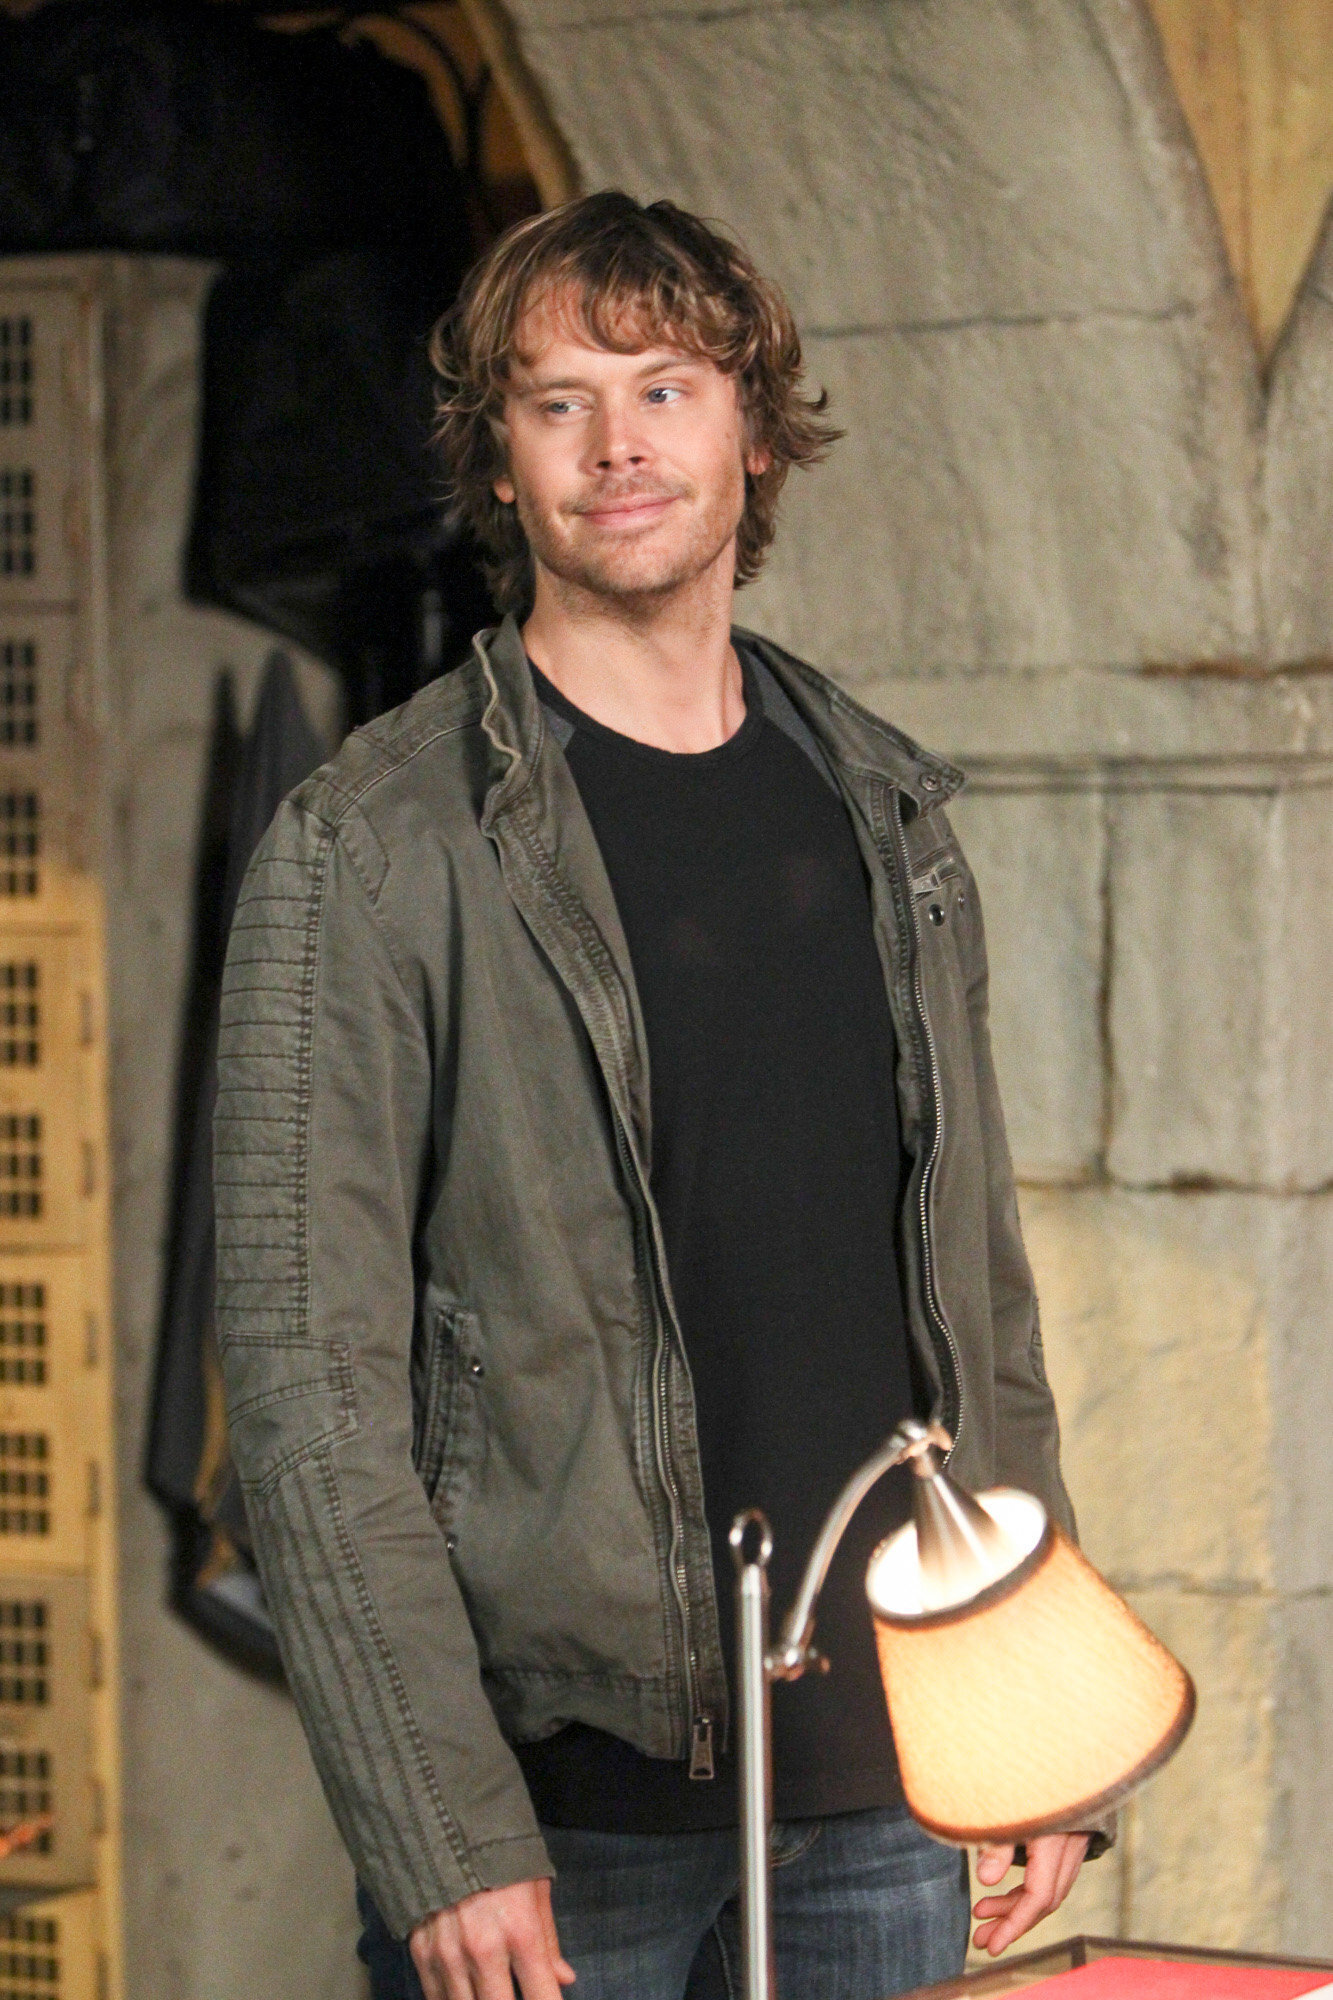 NCIS: Los Angeles - Between the Lines